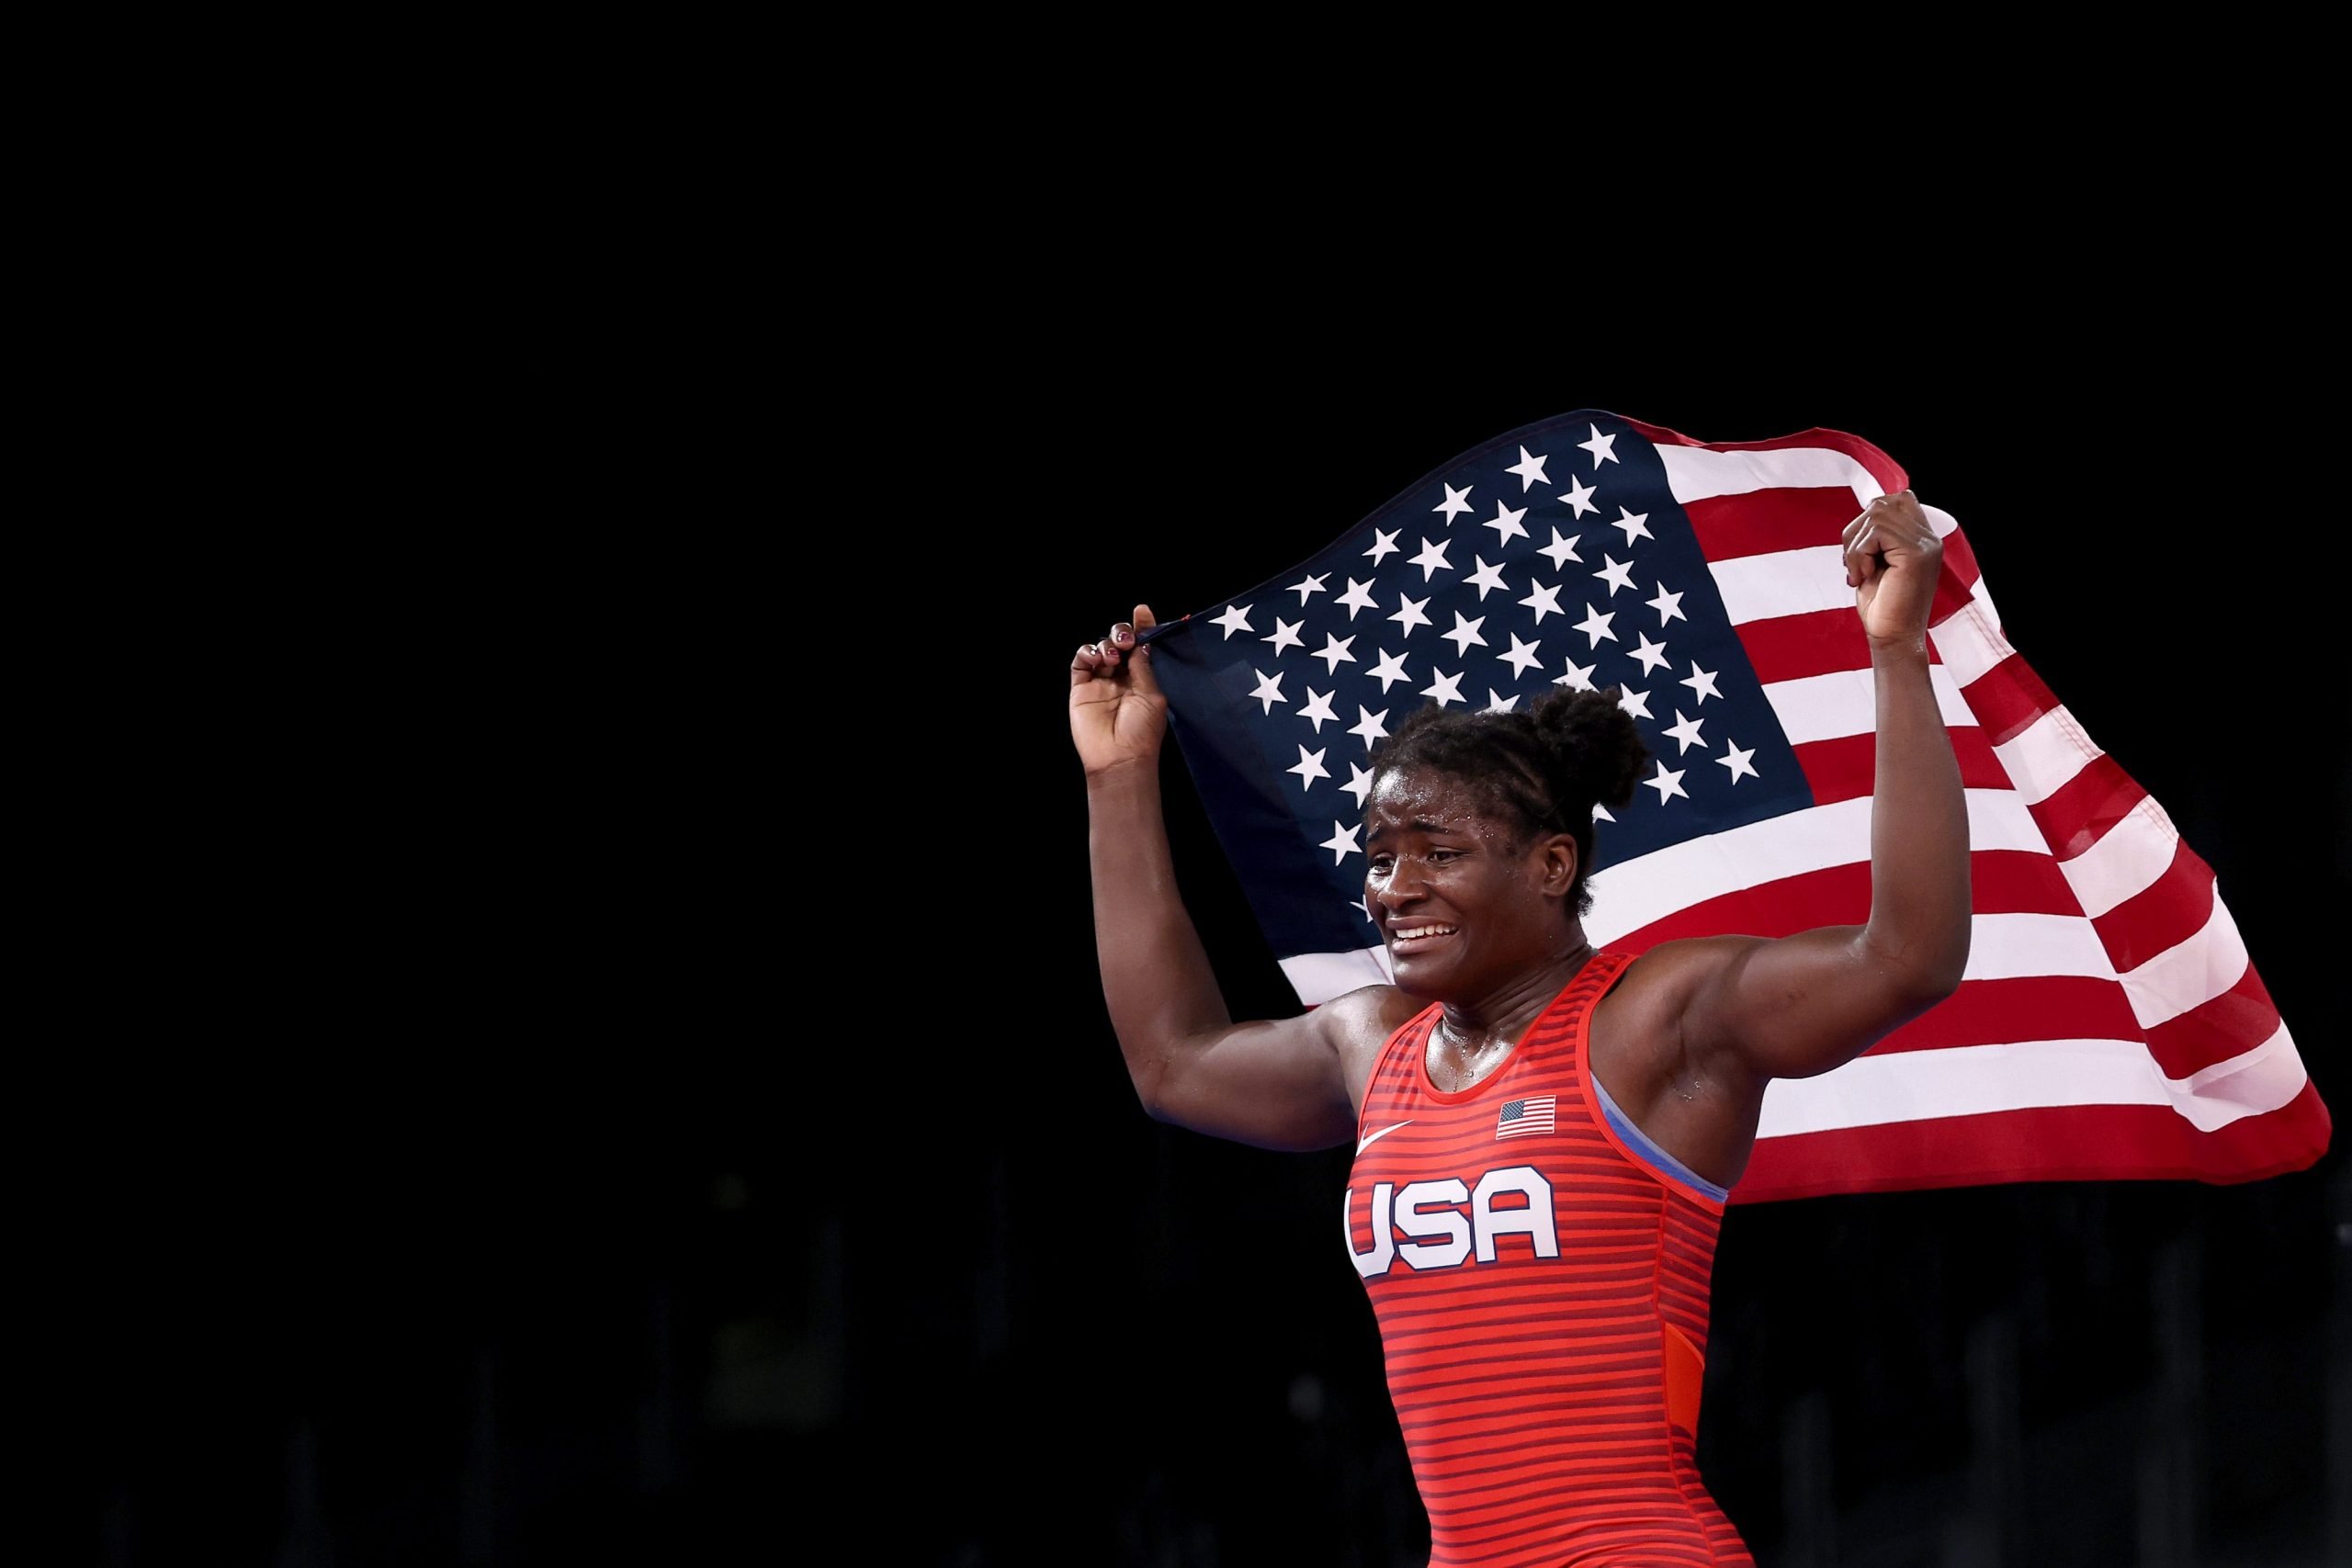 Tamyra Mensah-Stock carries the American flag above her shoulders after beating her opponent to win gold at the Tokyo Olympics on Tuesday.